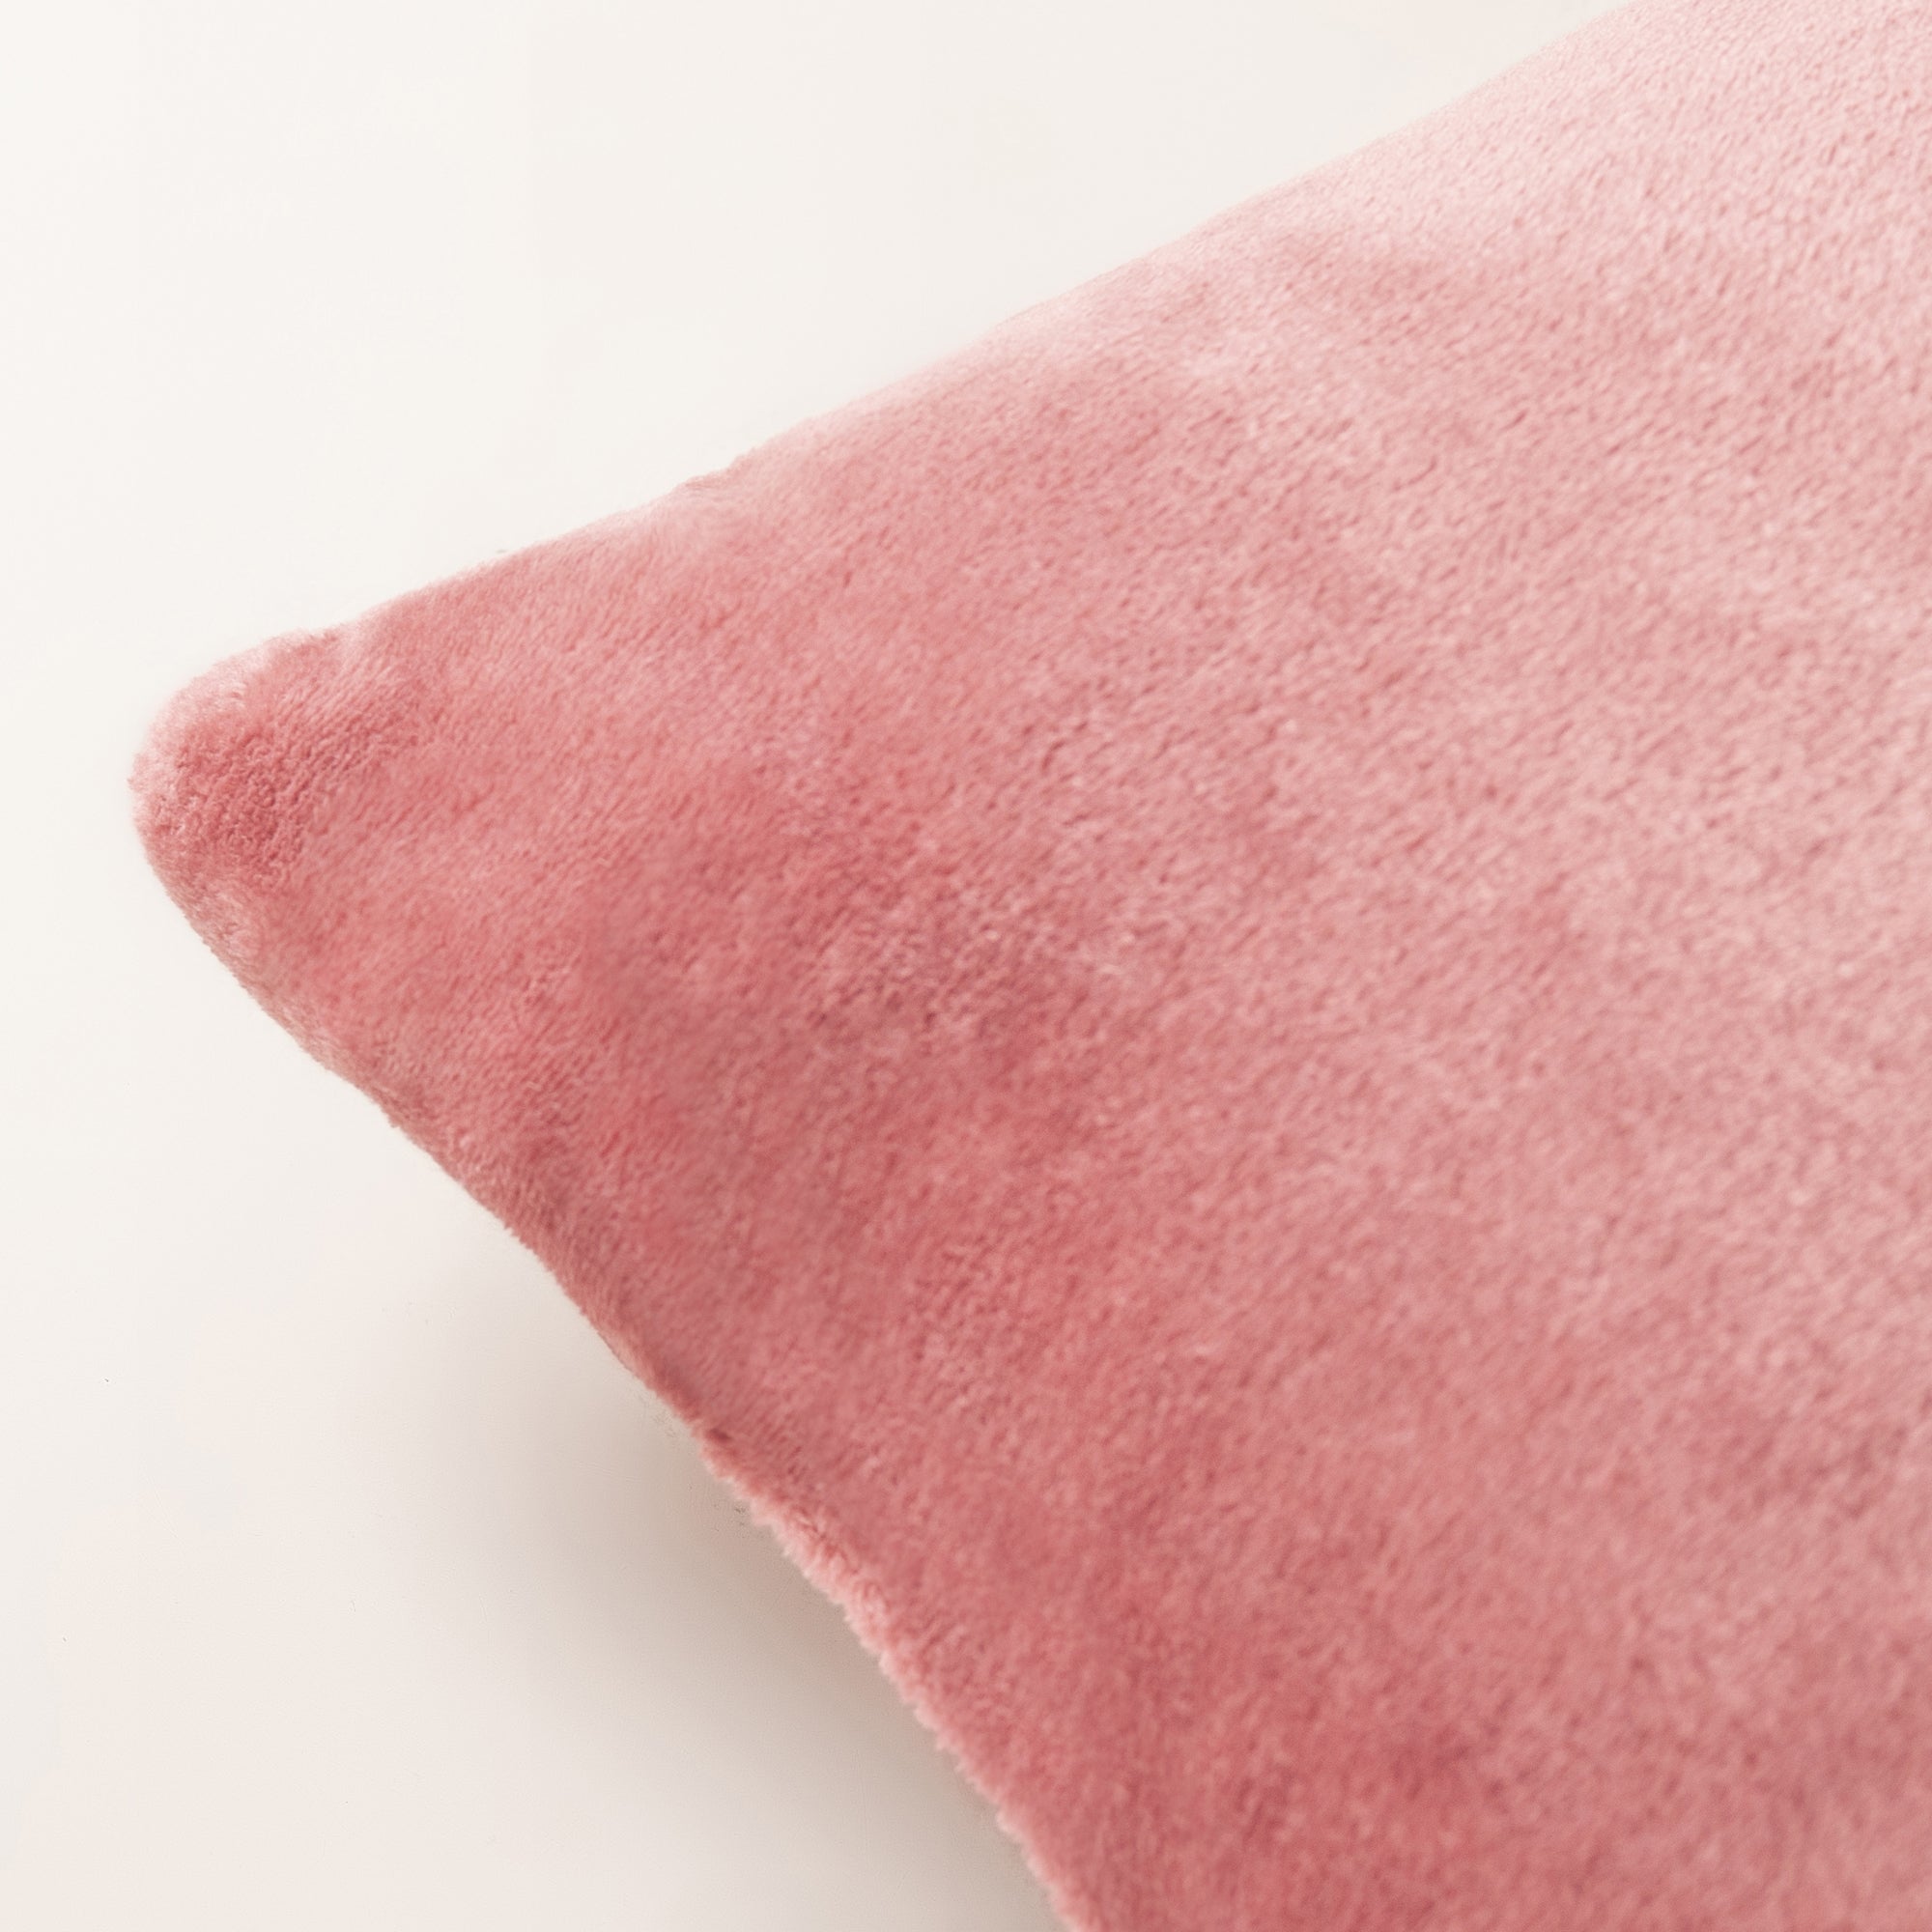 The Linen Company Accessories Rose Pink Plush Cushion